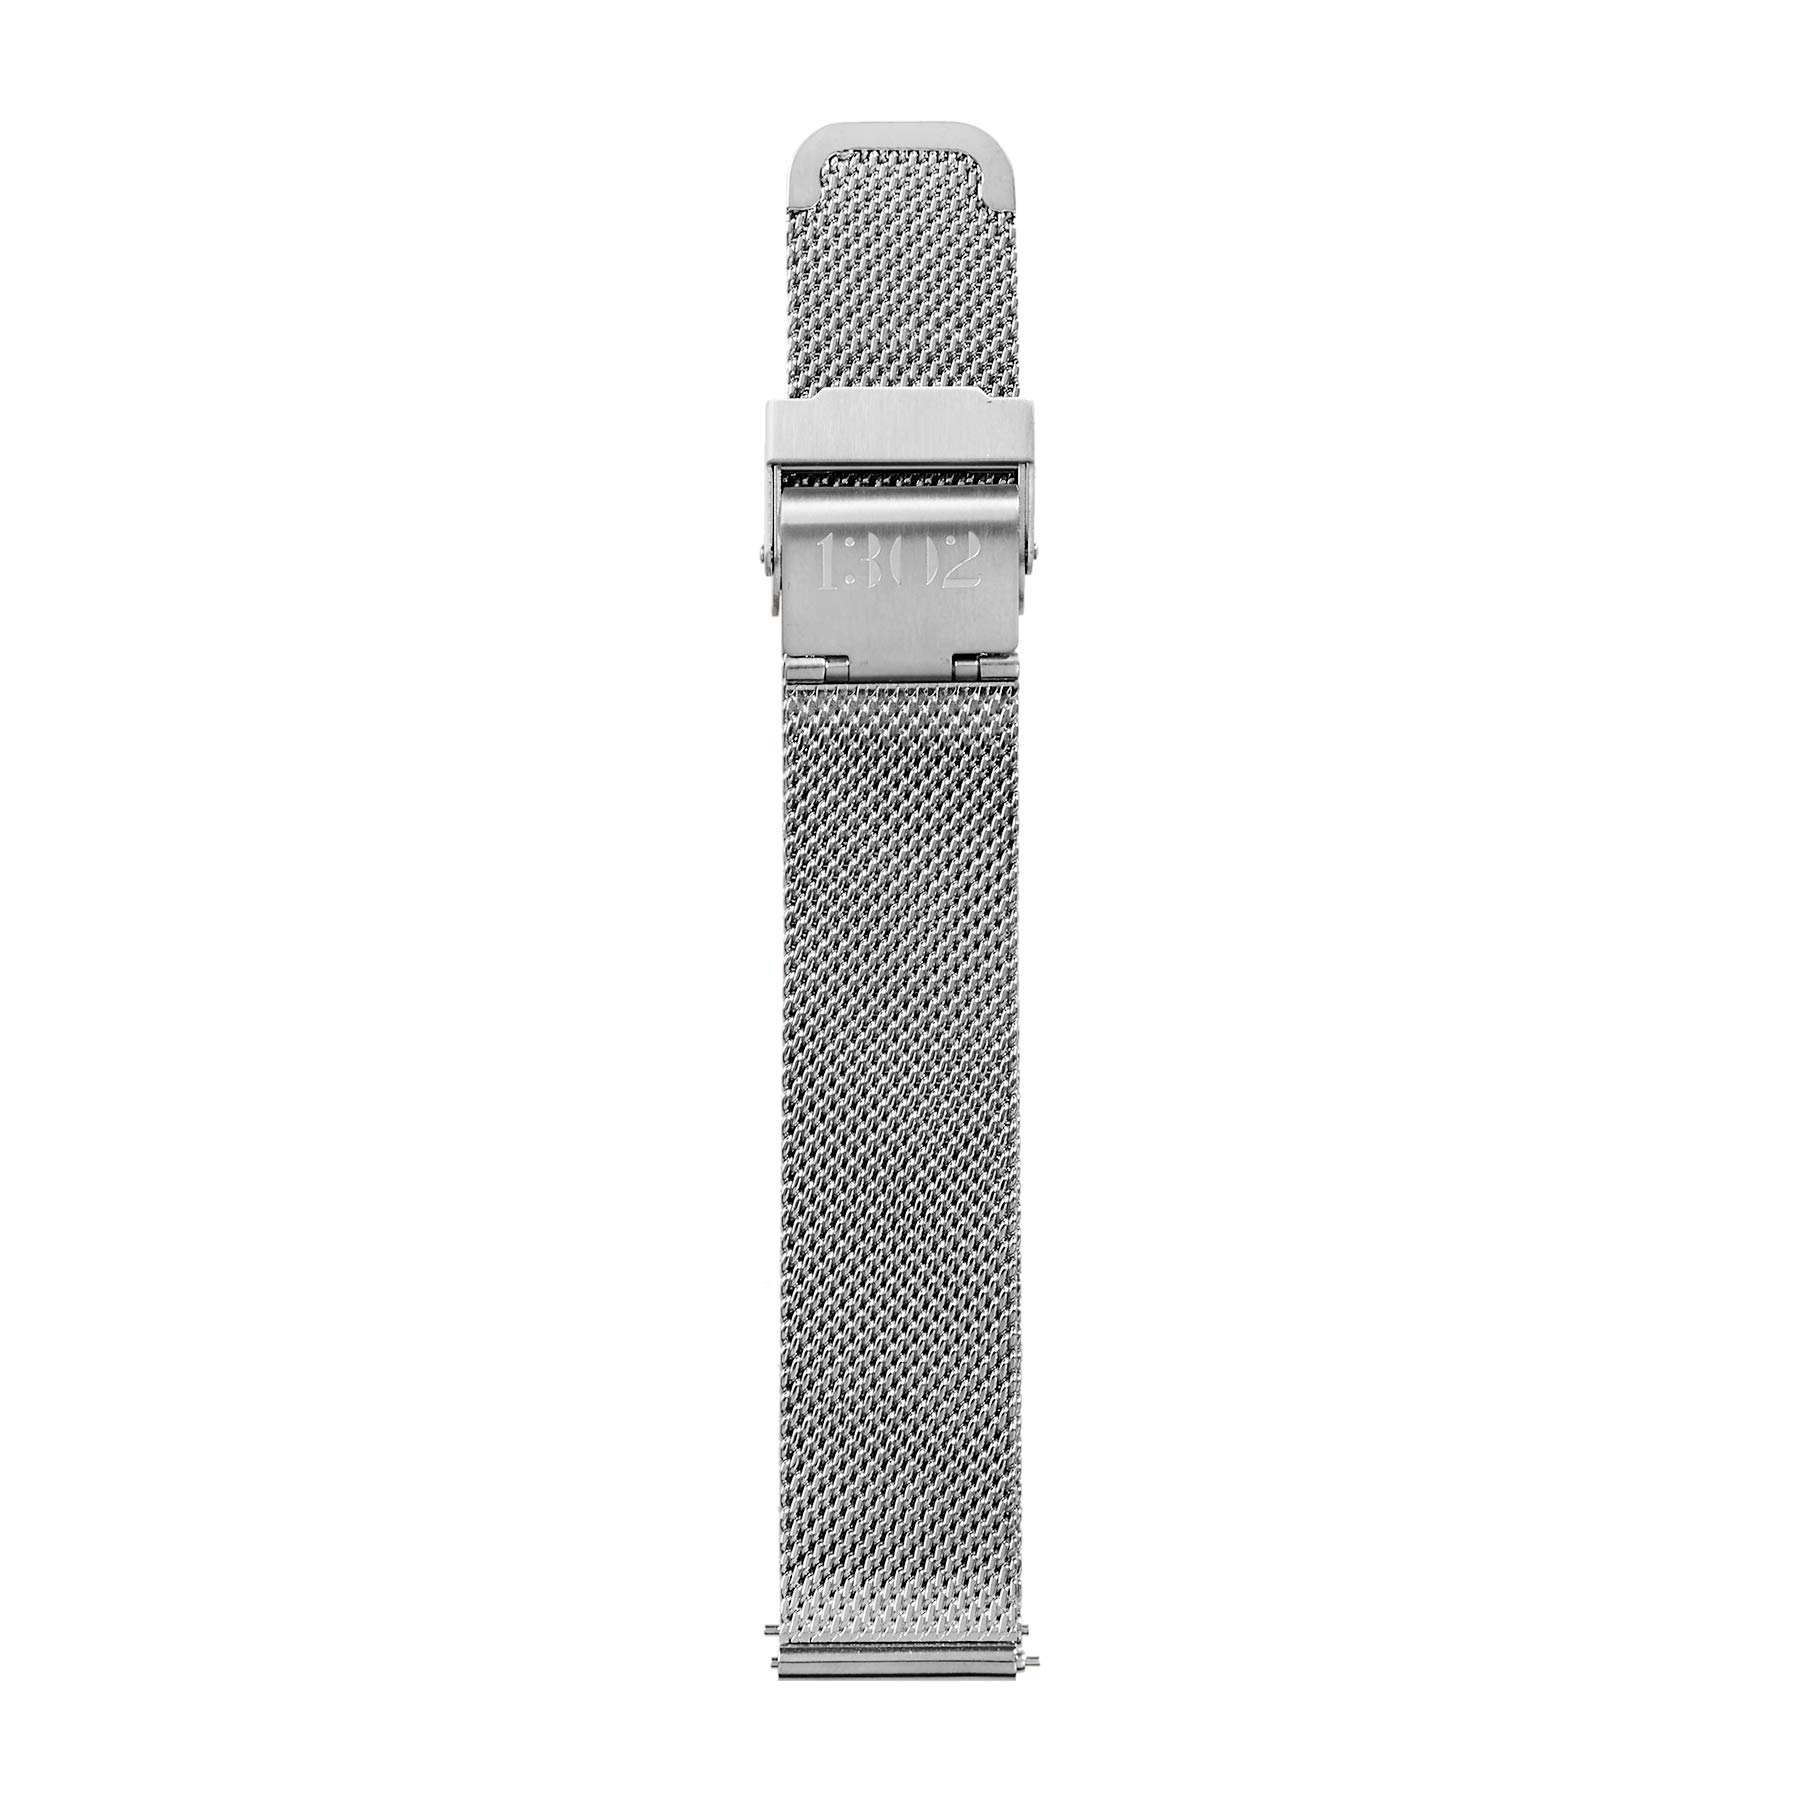 14mm, 16mm, 18mm, 20mm, 22mm Women's Watch Bands, Women's Watch Strap, Quick Release, Women's Stainless Steel Watch Band, Replacement Watch Strap, Women's Mesh Watch Band, Milanese…